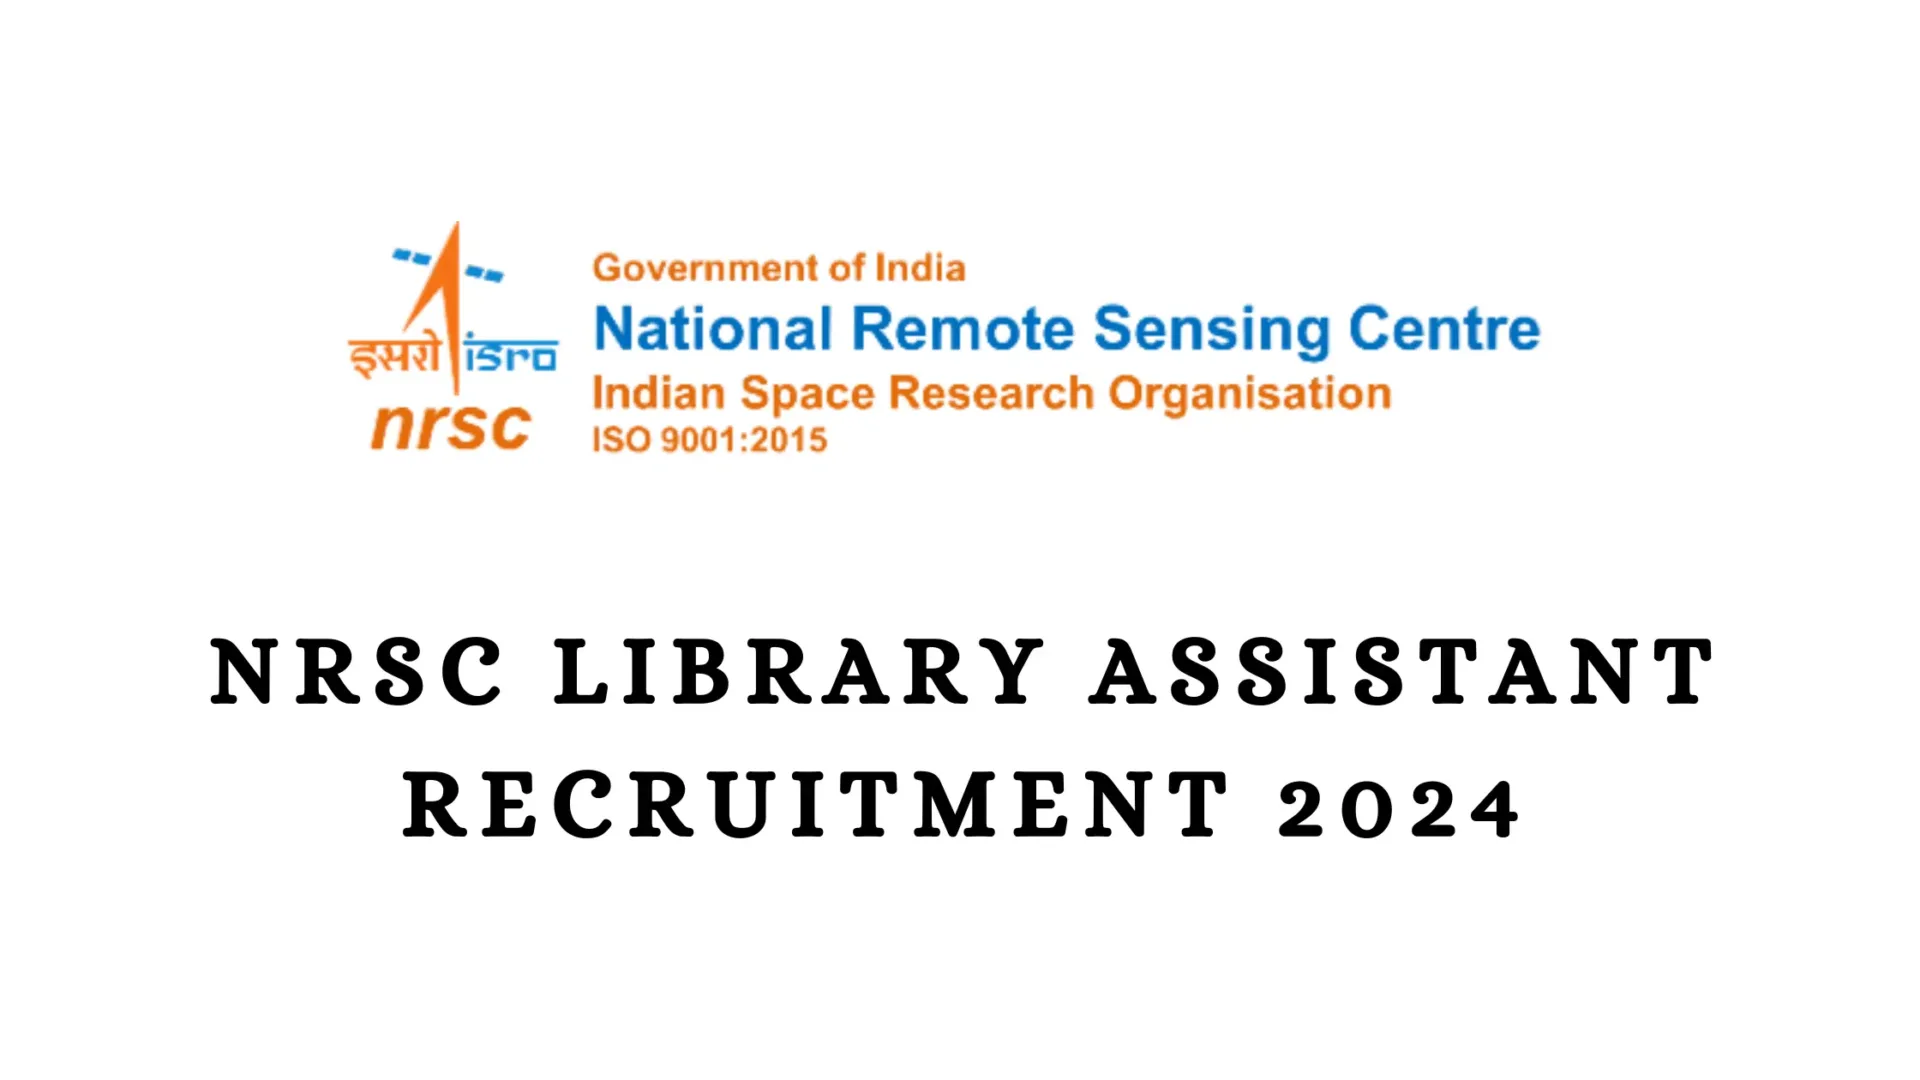 NRSC Library Assistant Recruitment 2024